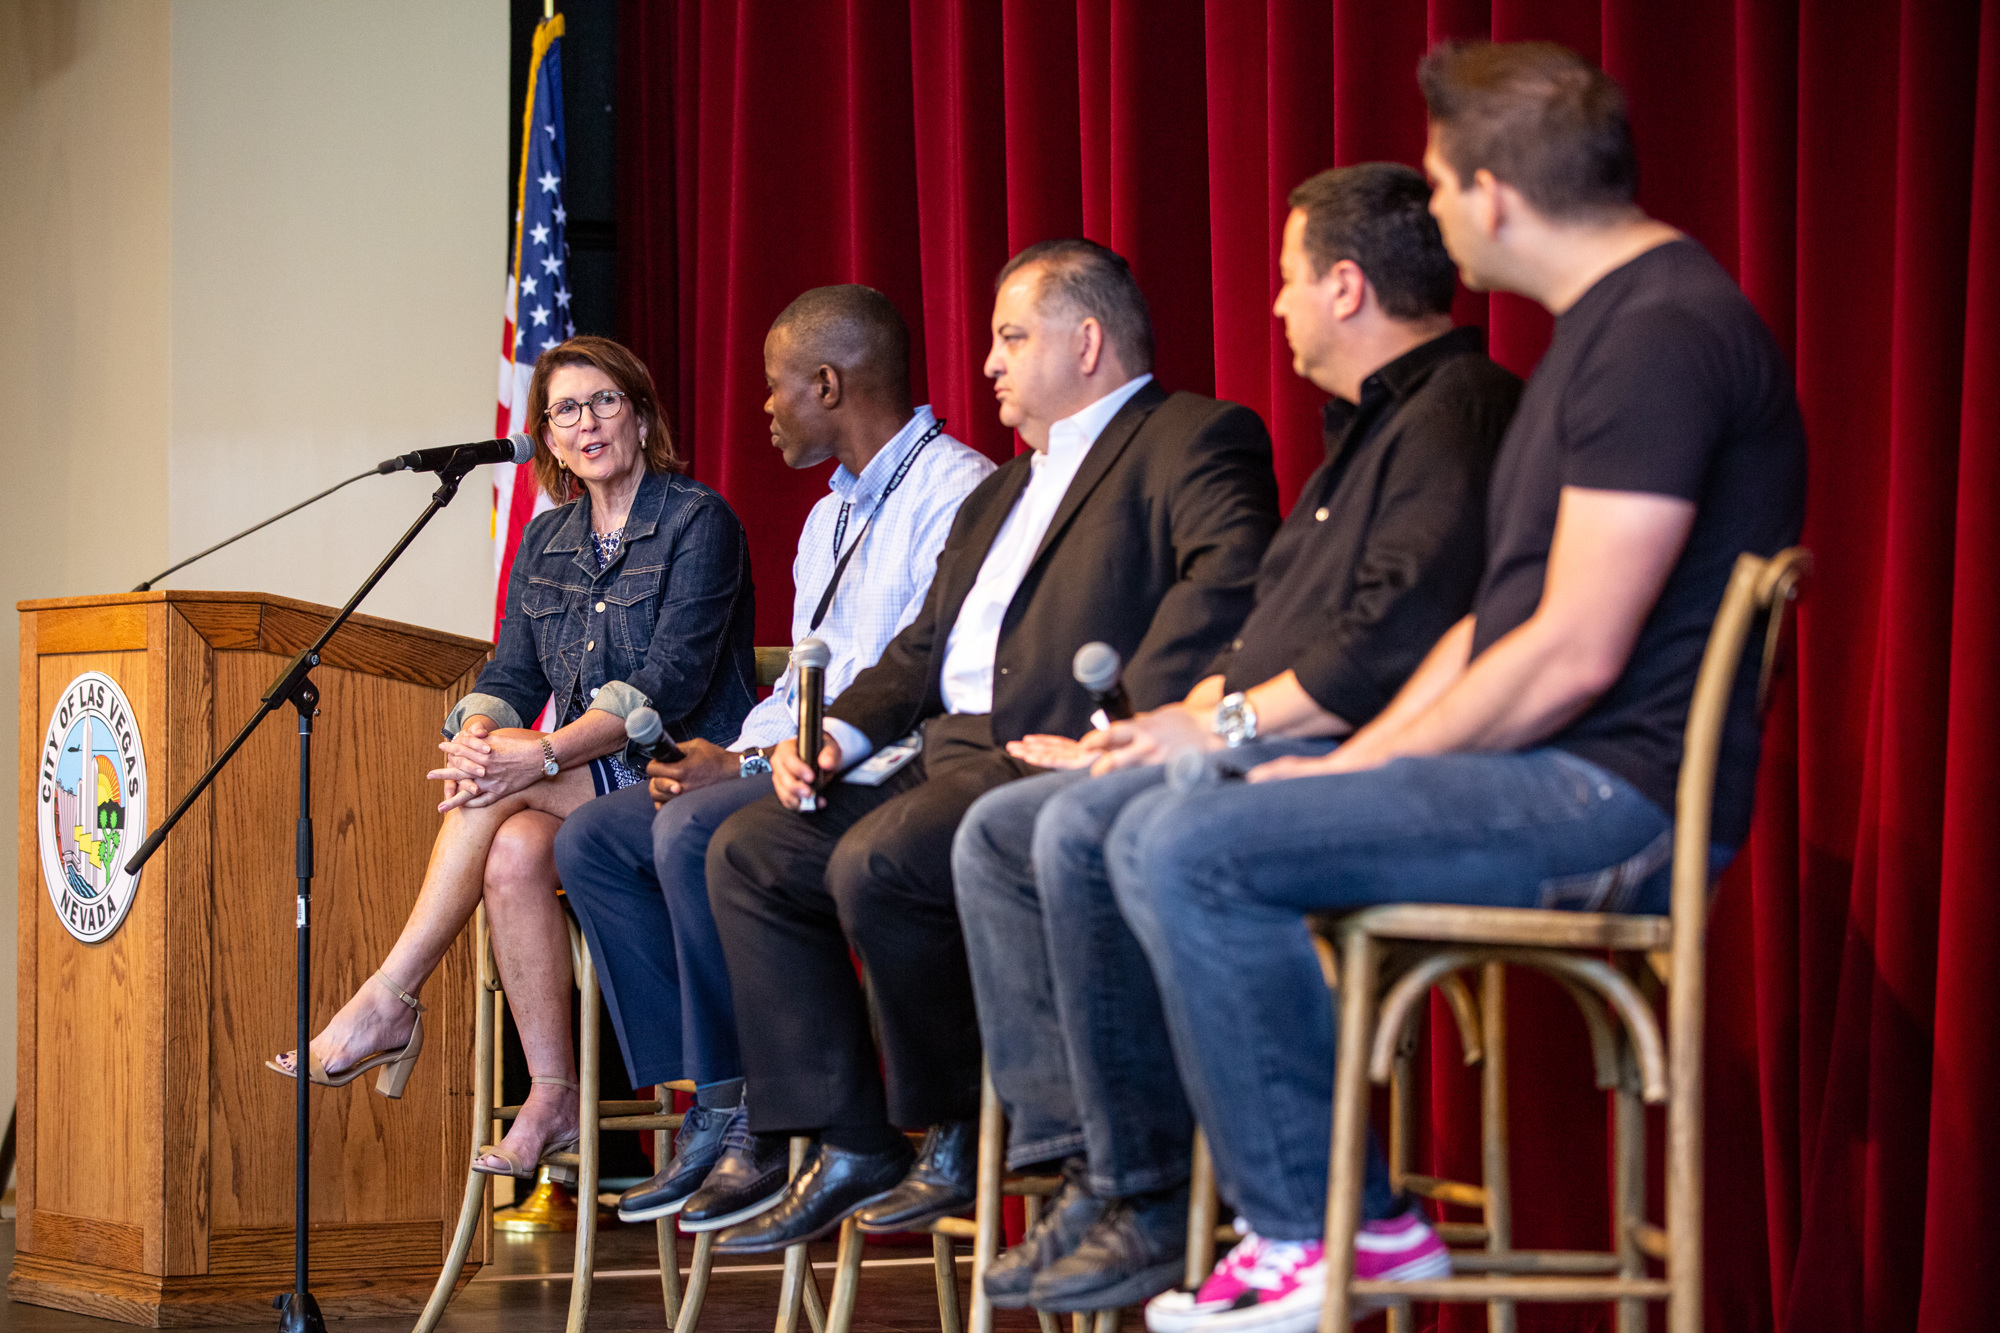 Karen Bowling, director of the Center for Entrepreneurship and Innovation at UNF, leads a panel discussion on Creating an Innovative Ecosystem. From left, Carlton Robinson, Michael Sherwood, Daryl Gibson and Rob Mallery.